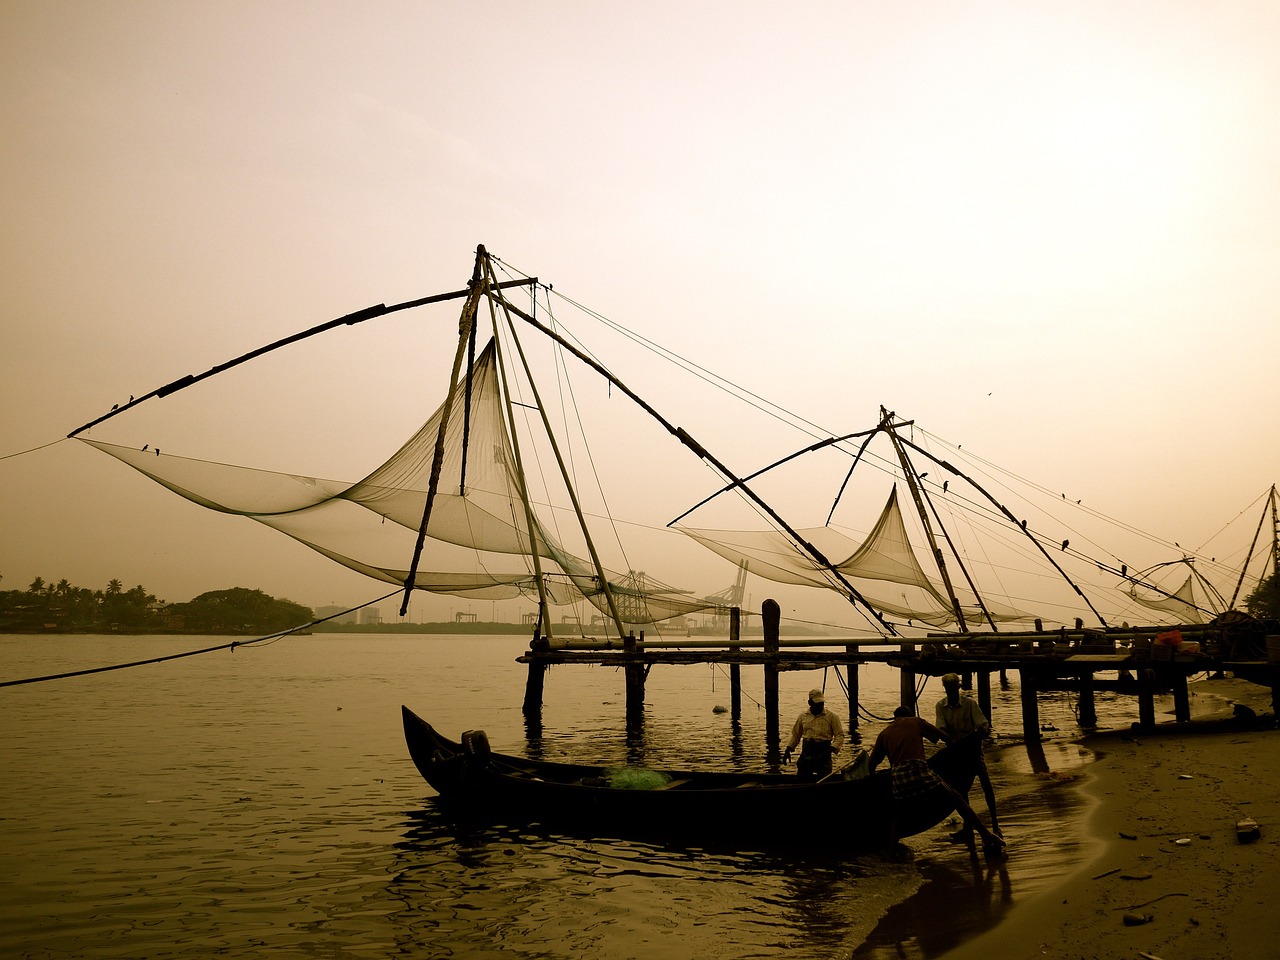 5-Day Cultural and Culinary Journey Through Kochi and Surroundings